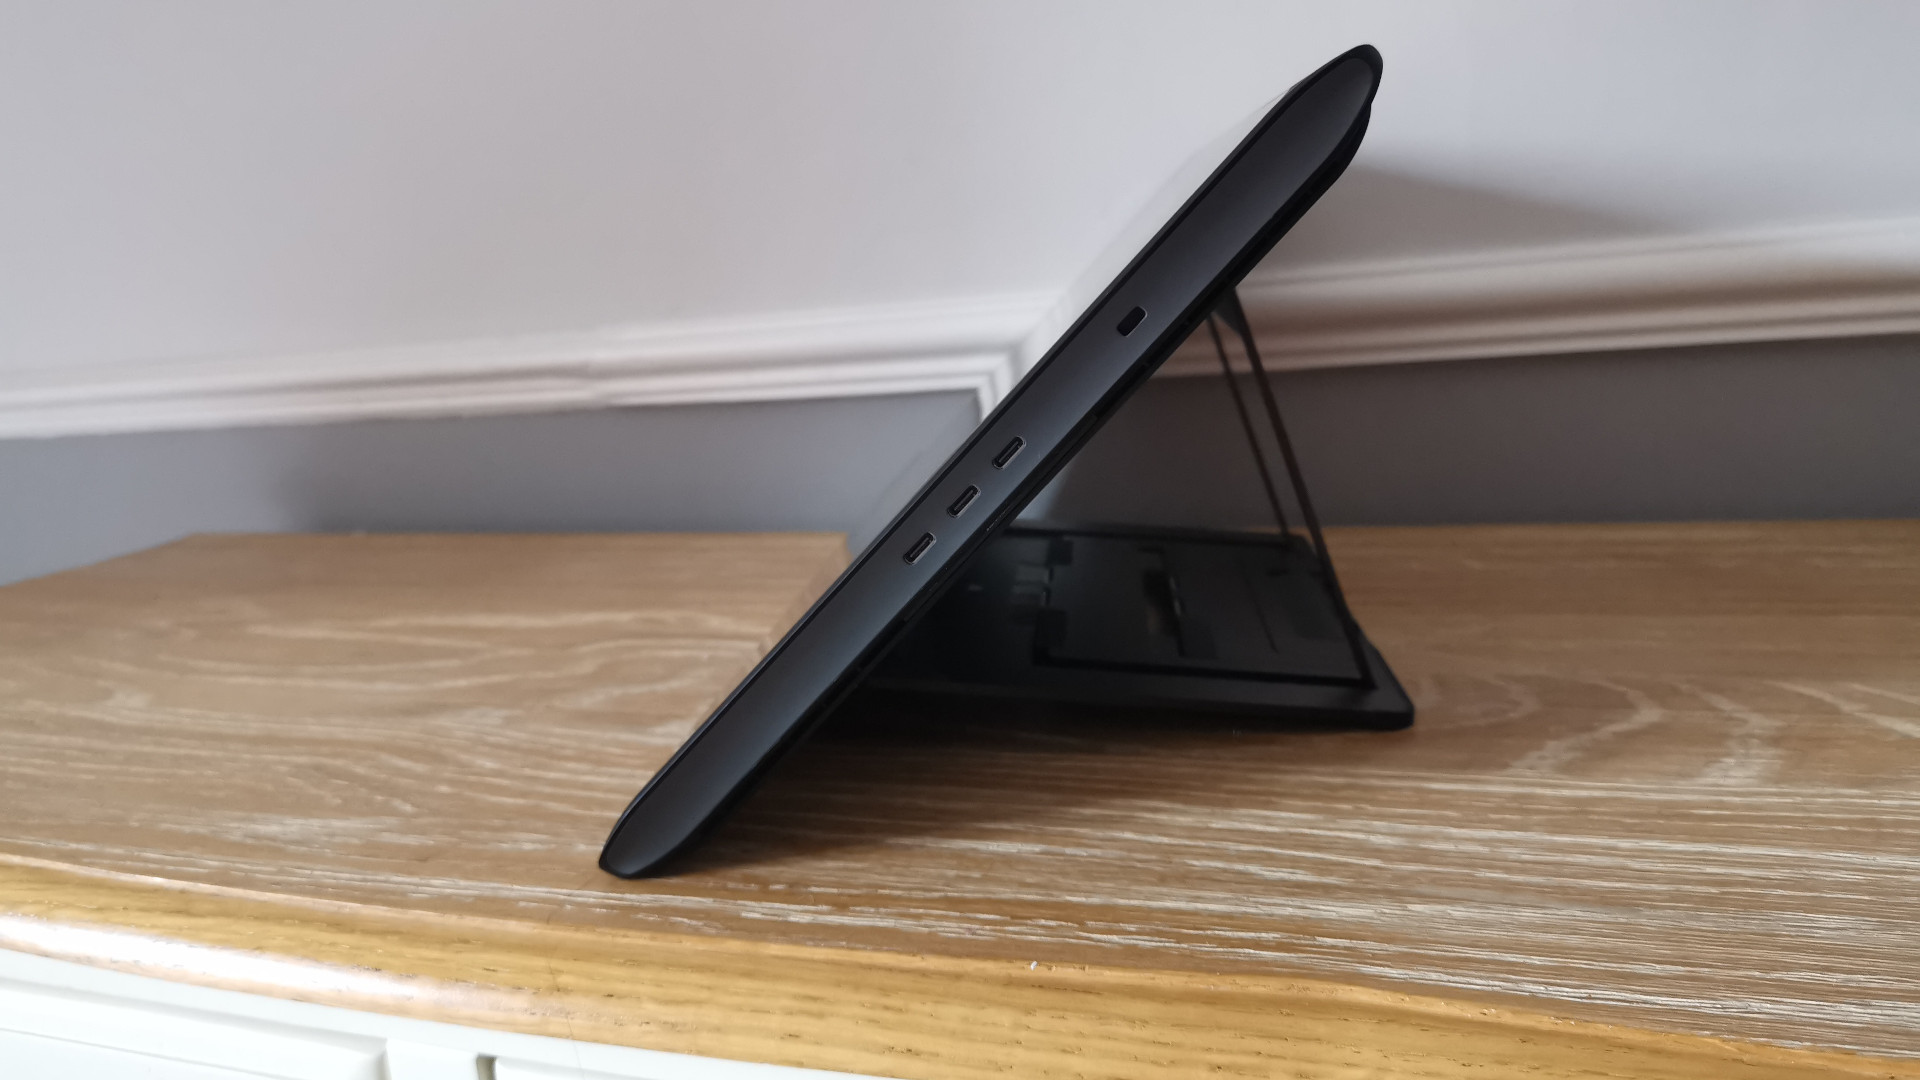 A side view of the Wacom Mobile Studio Pro